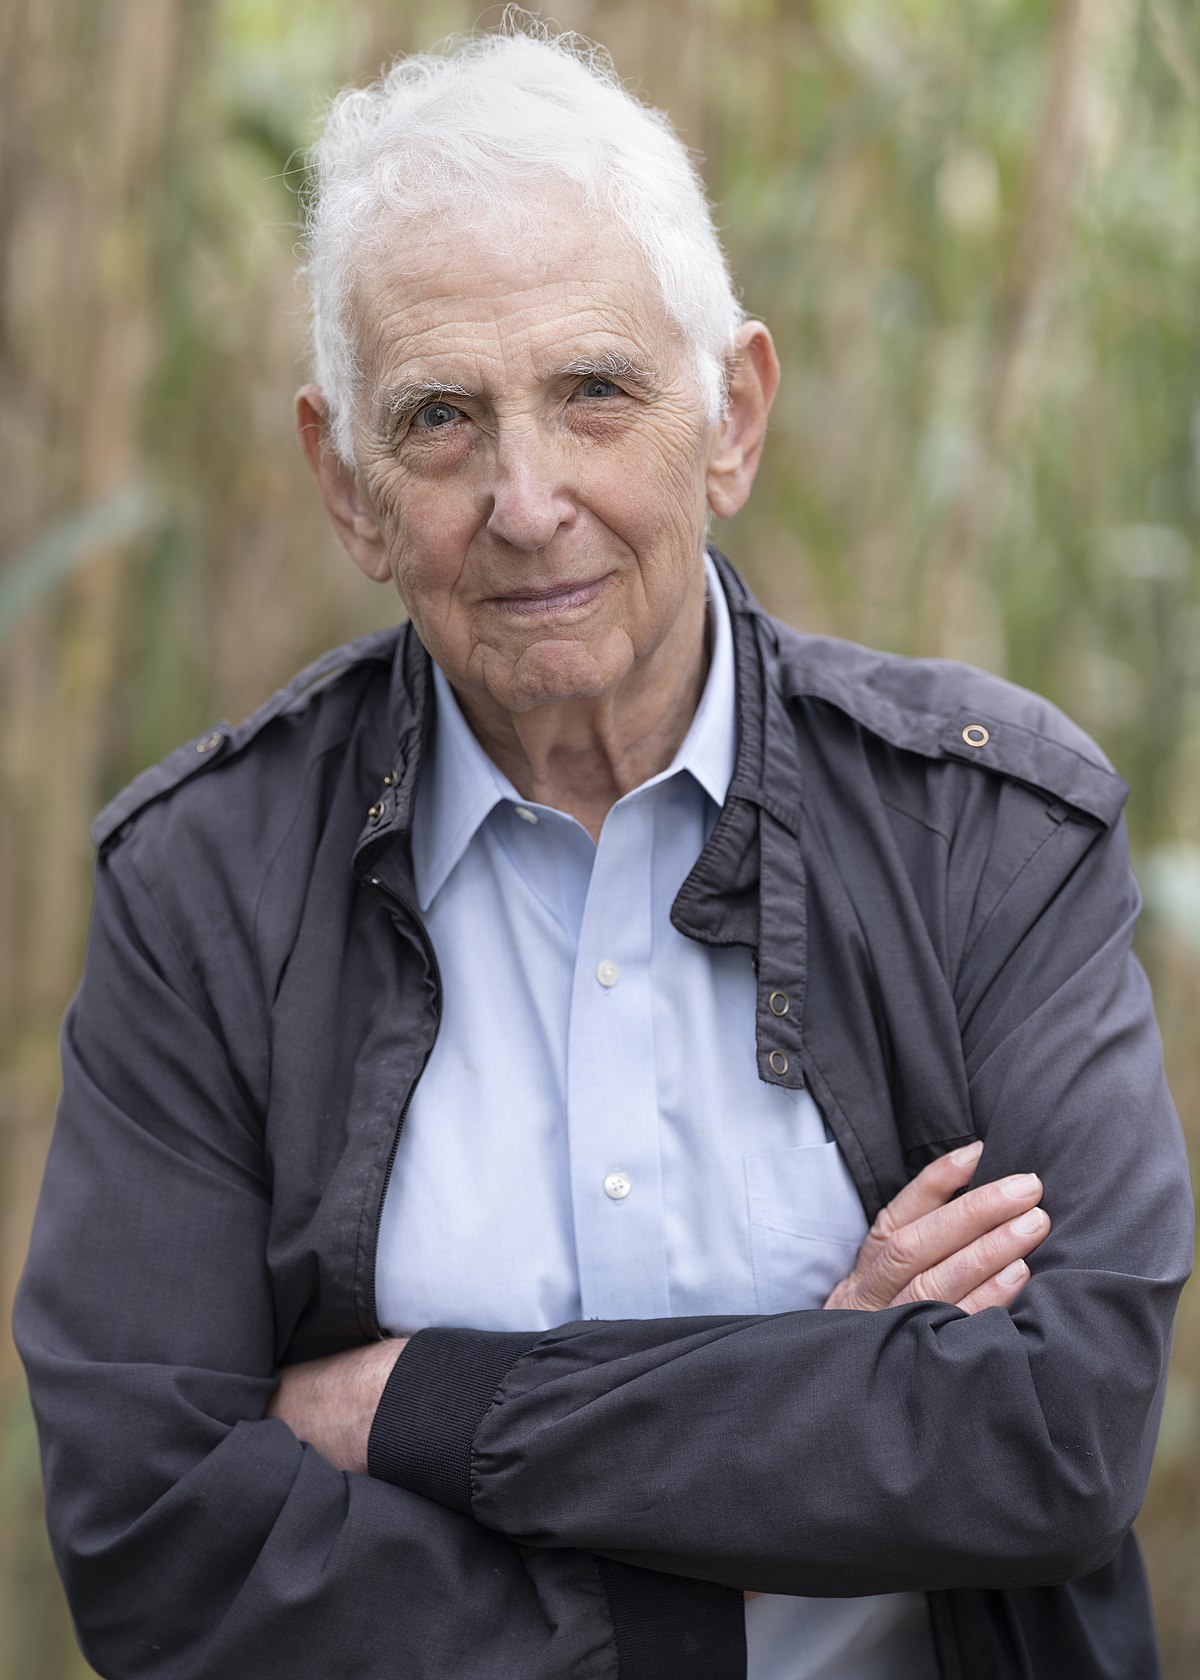 US Domestic News Roundup: Daniel Ellsberg, who leaked 'Pentagon Papers,' dies at 92; Minneapolis police face federal oversight for excessive force, discrimination and more